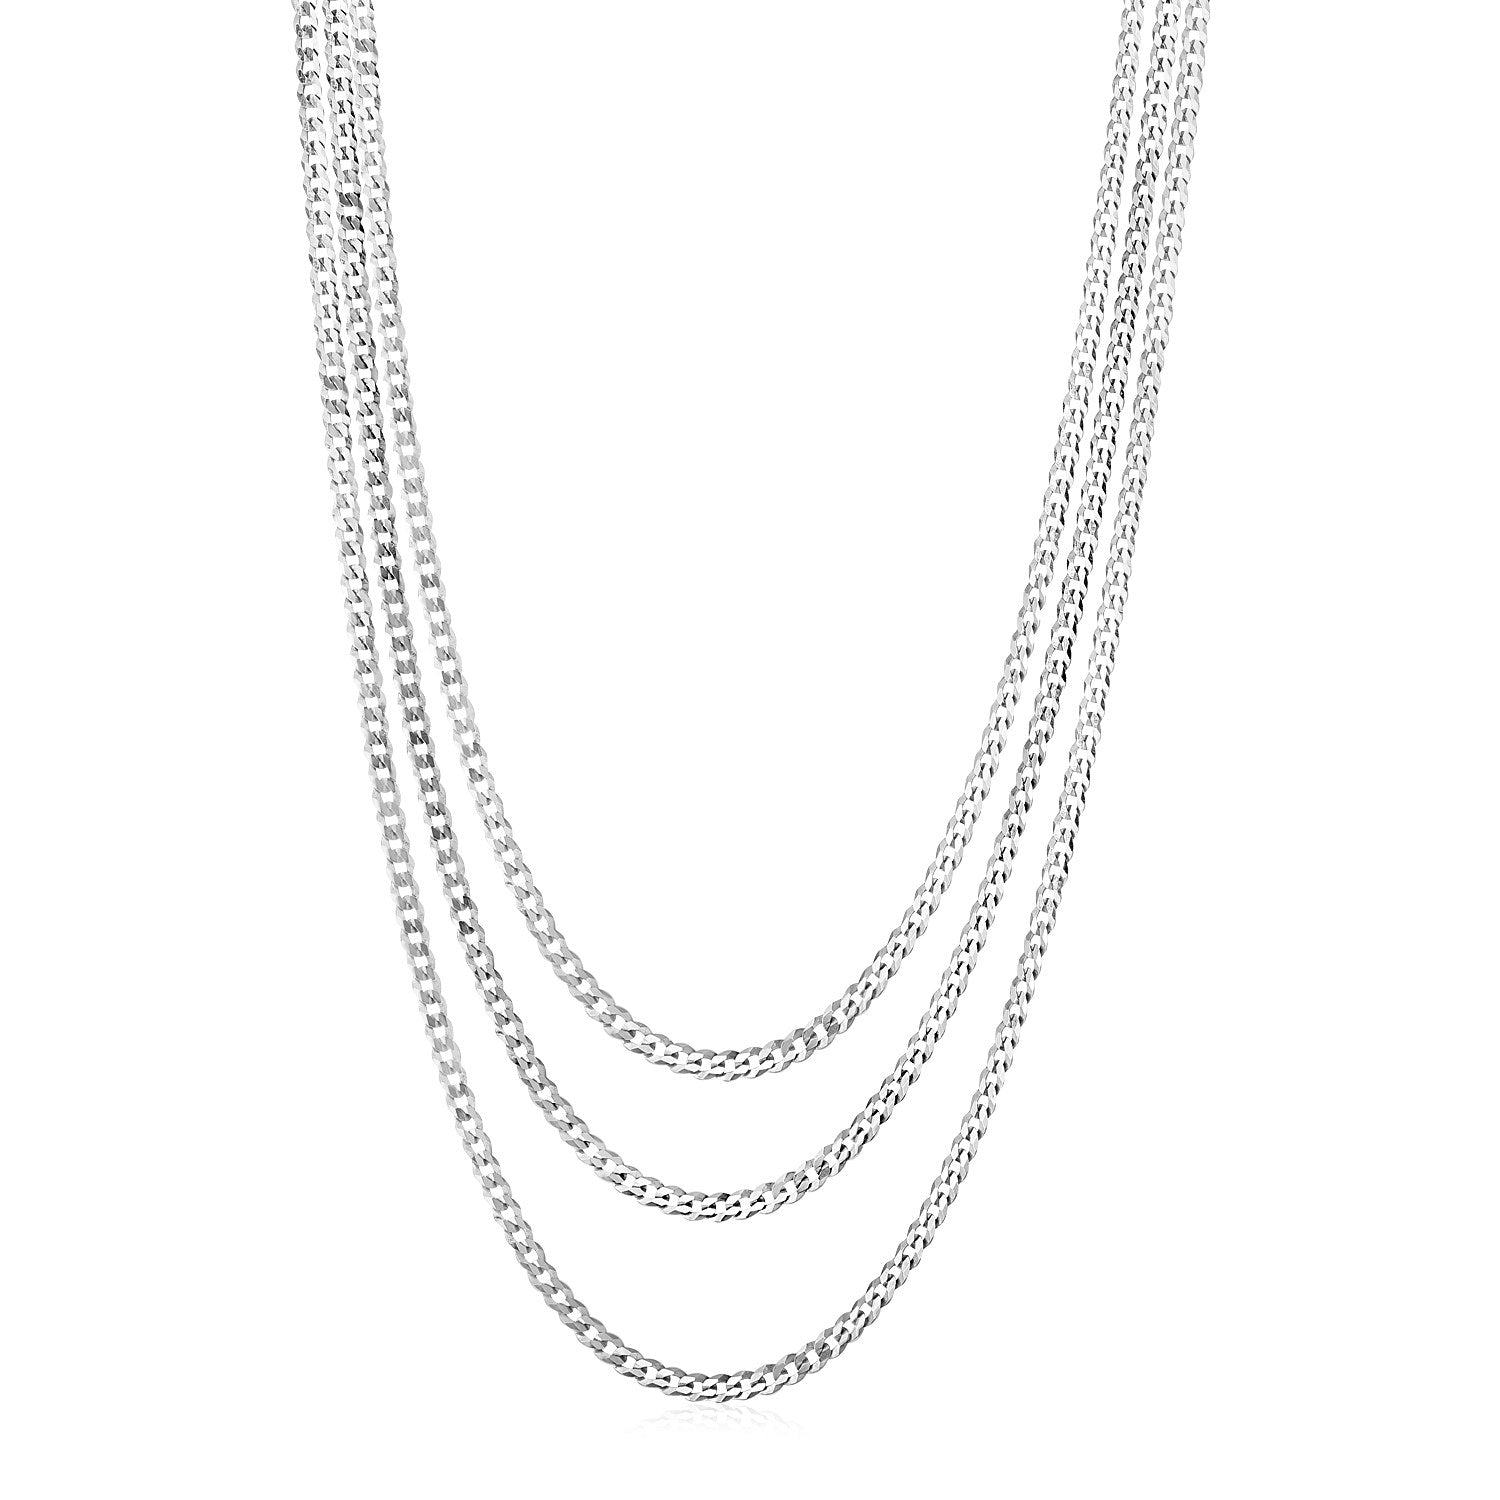 Sterling Silver Three Strand Polished Link Necklace